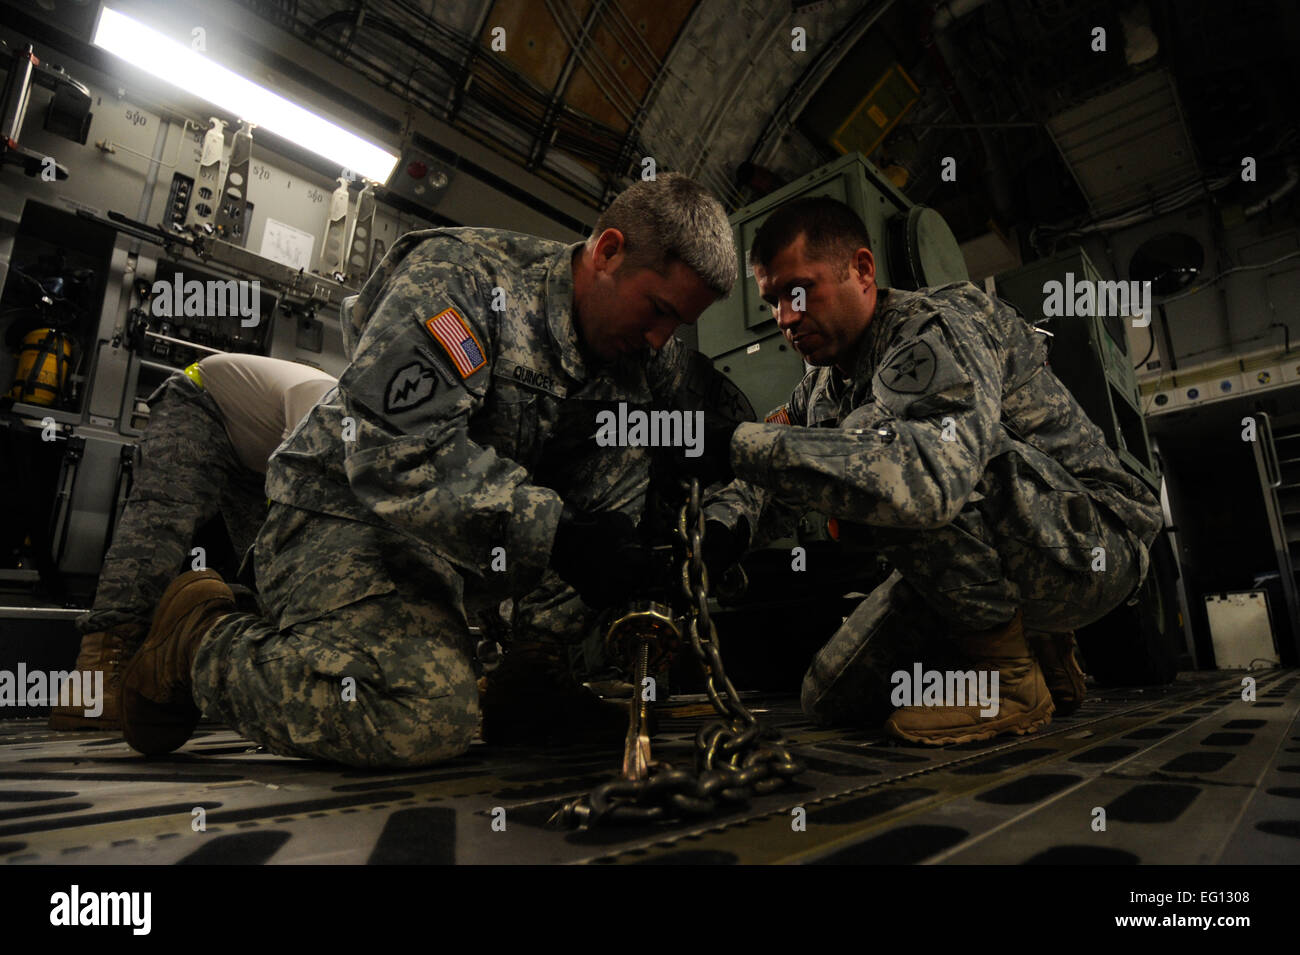 U.S. Army Soldiers from Joint Communications Support Element work to load a generator on a U.S. Air Force C-17 Globemaster III aircraft headed to Haiti for earthquake relief efforts Jan. 15, 2010 at MacDill Air Force Base Fla. : Staff Sgt. Jason RobertsonNot Reviewed Stock Photo